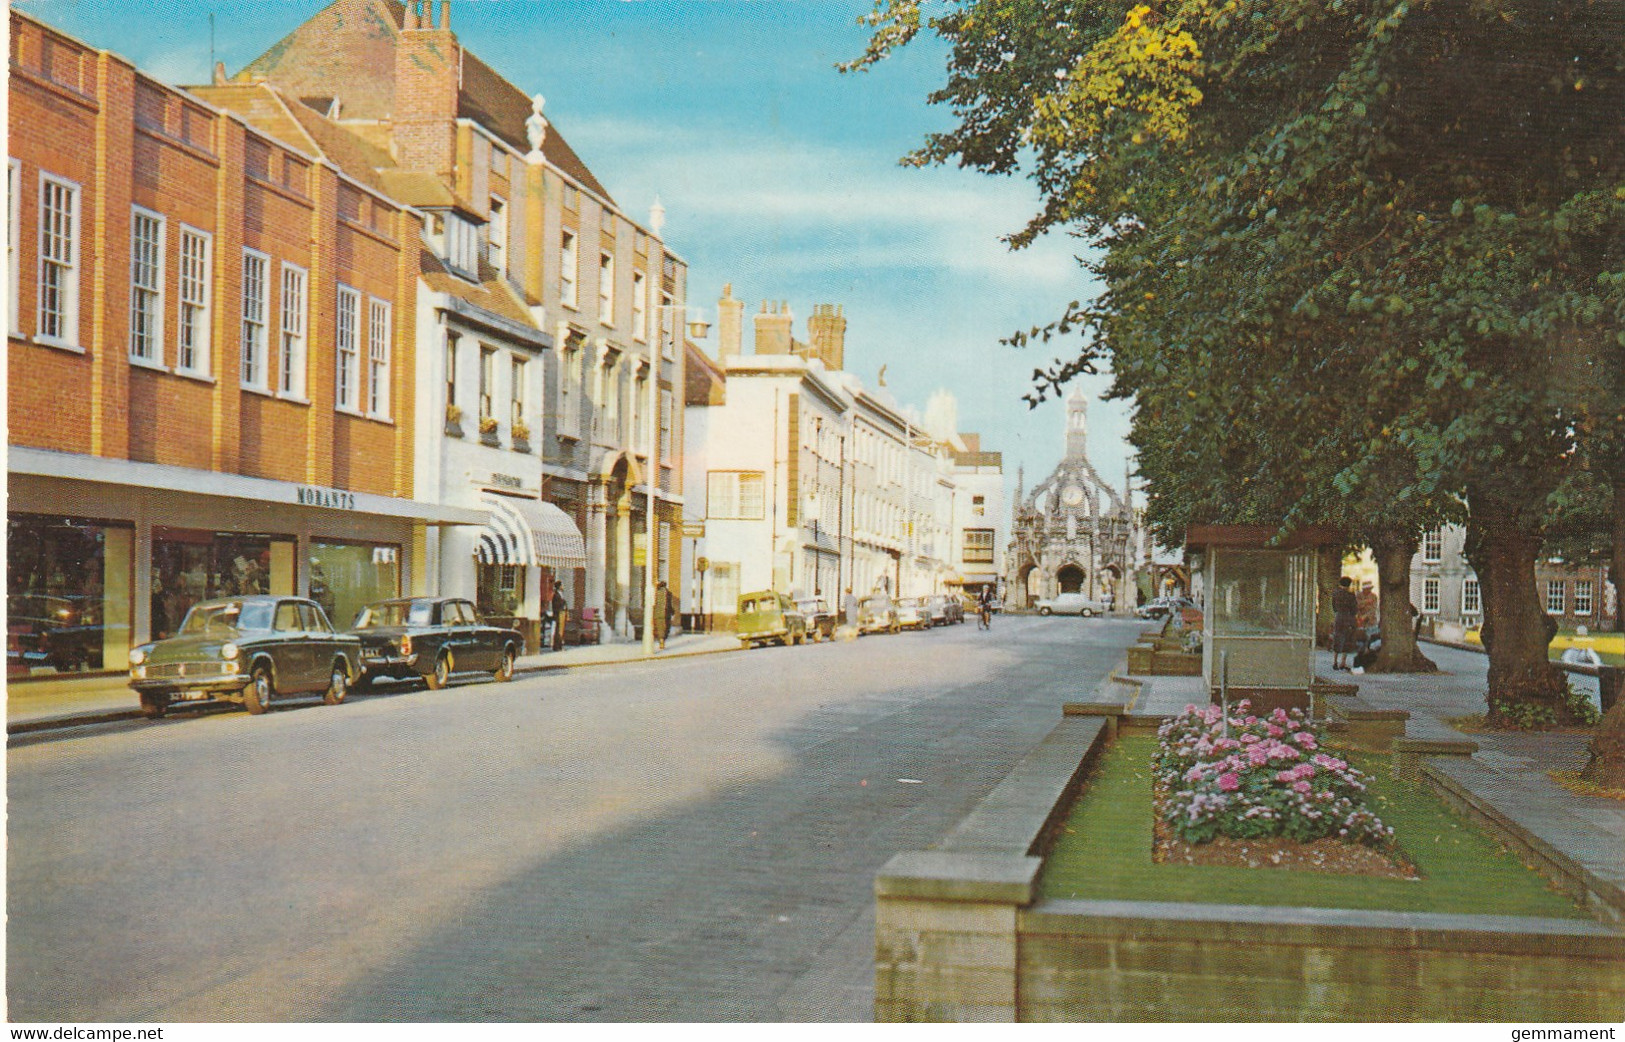 CHICHESTER - WEST STREET AND MARKET CROSS - Chichester